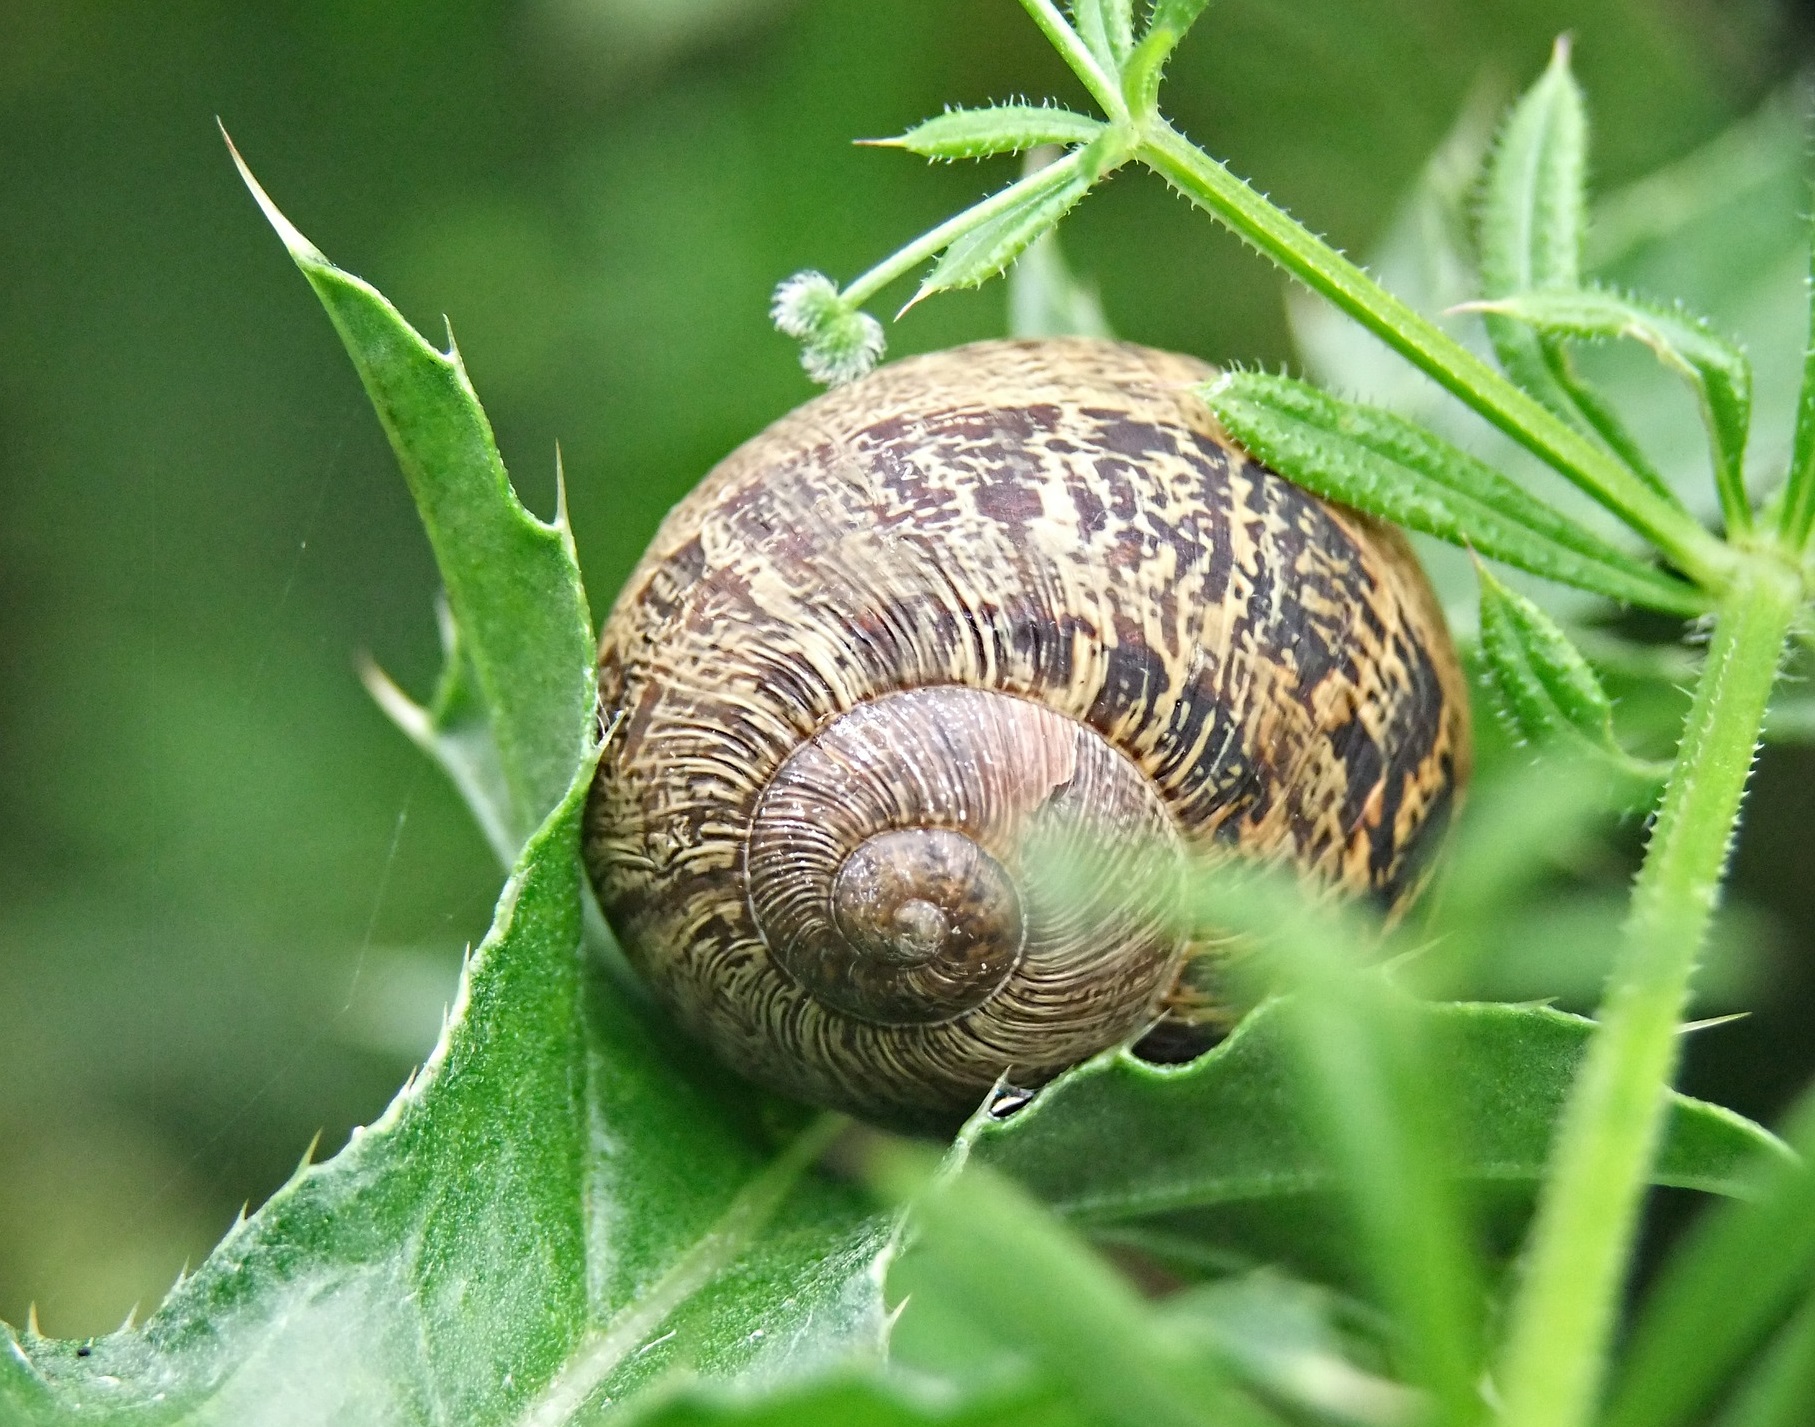 With the snail as its mascot, the Slow movement challenges industrialization and speed in the name of efficiency. Pixabay